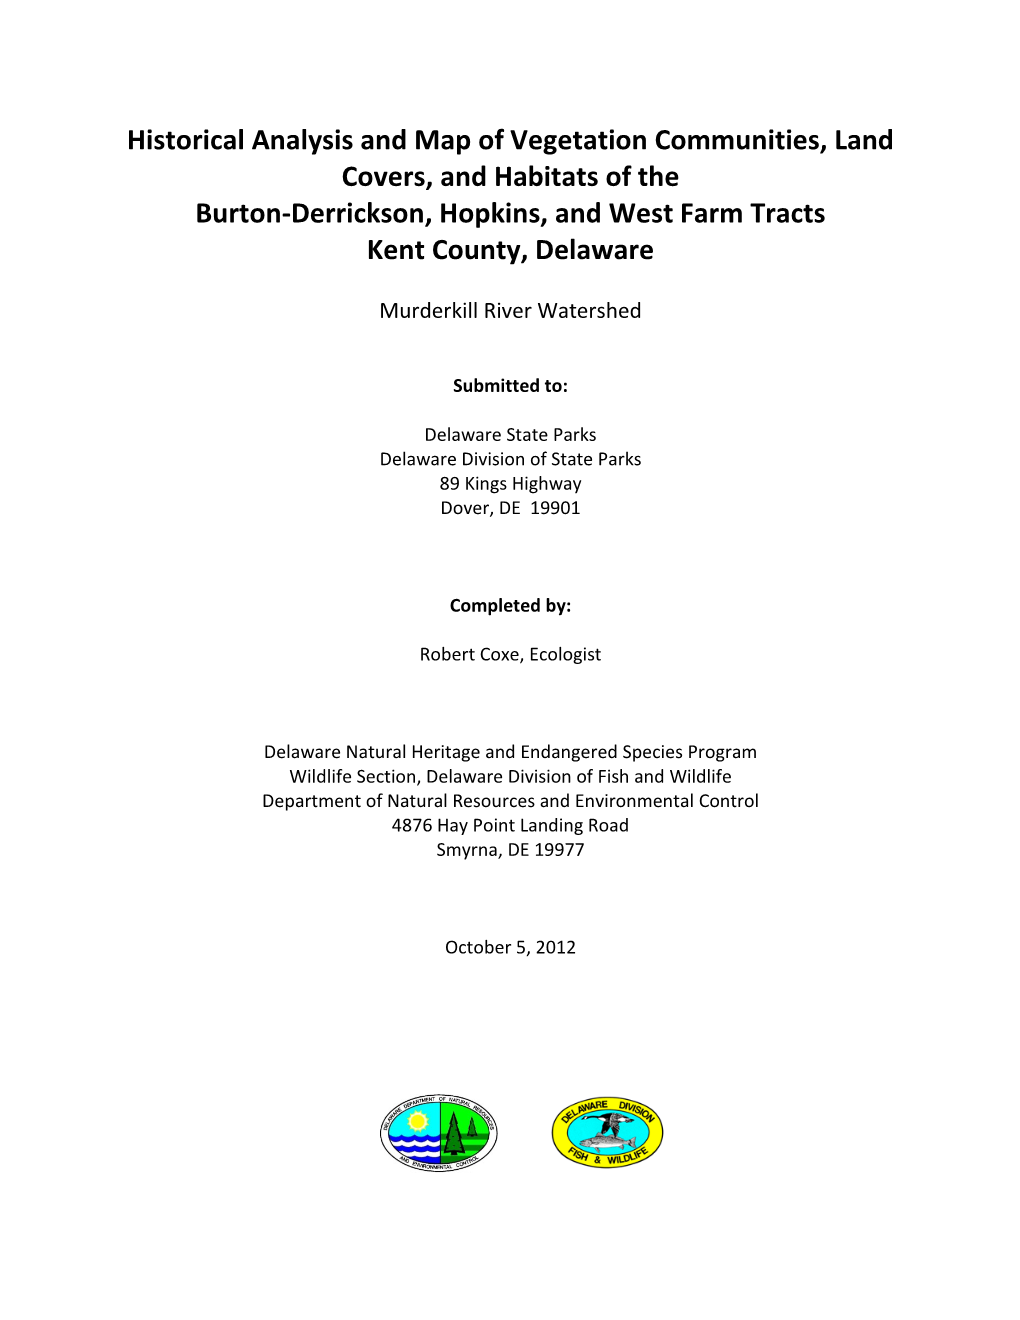 Historical Analysis and Map of Vegetation Communities, Land Covers, and Habitats of the Burton-Derrickson, Hopkins, and West Farm Tracts Kent County, Delaware